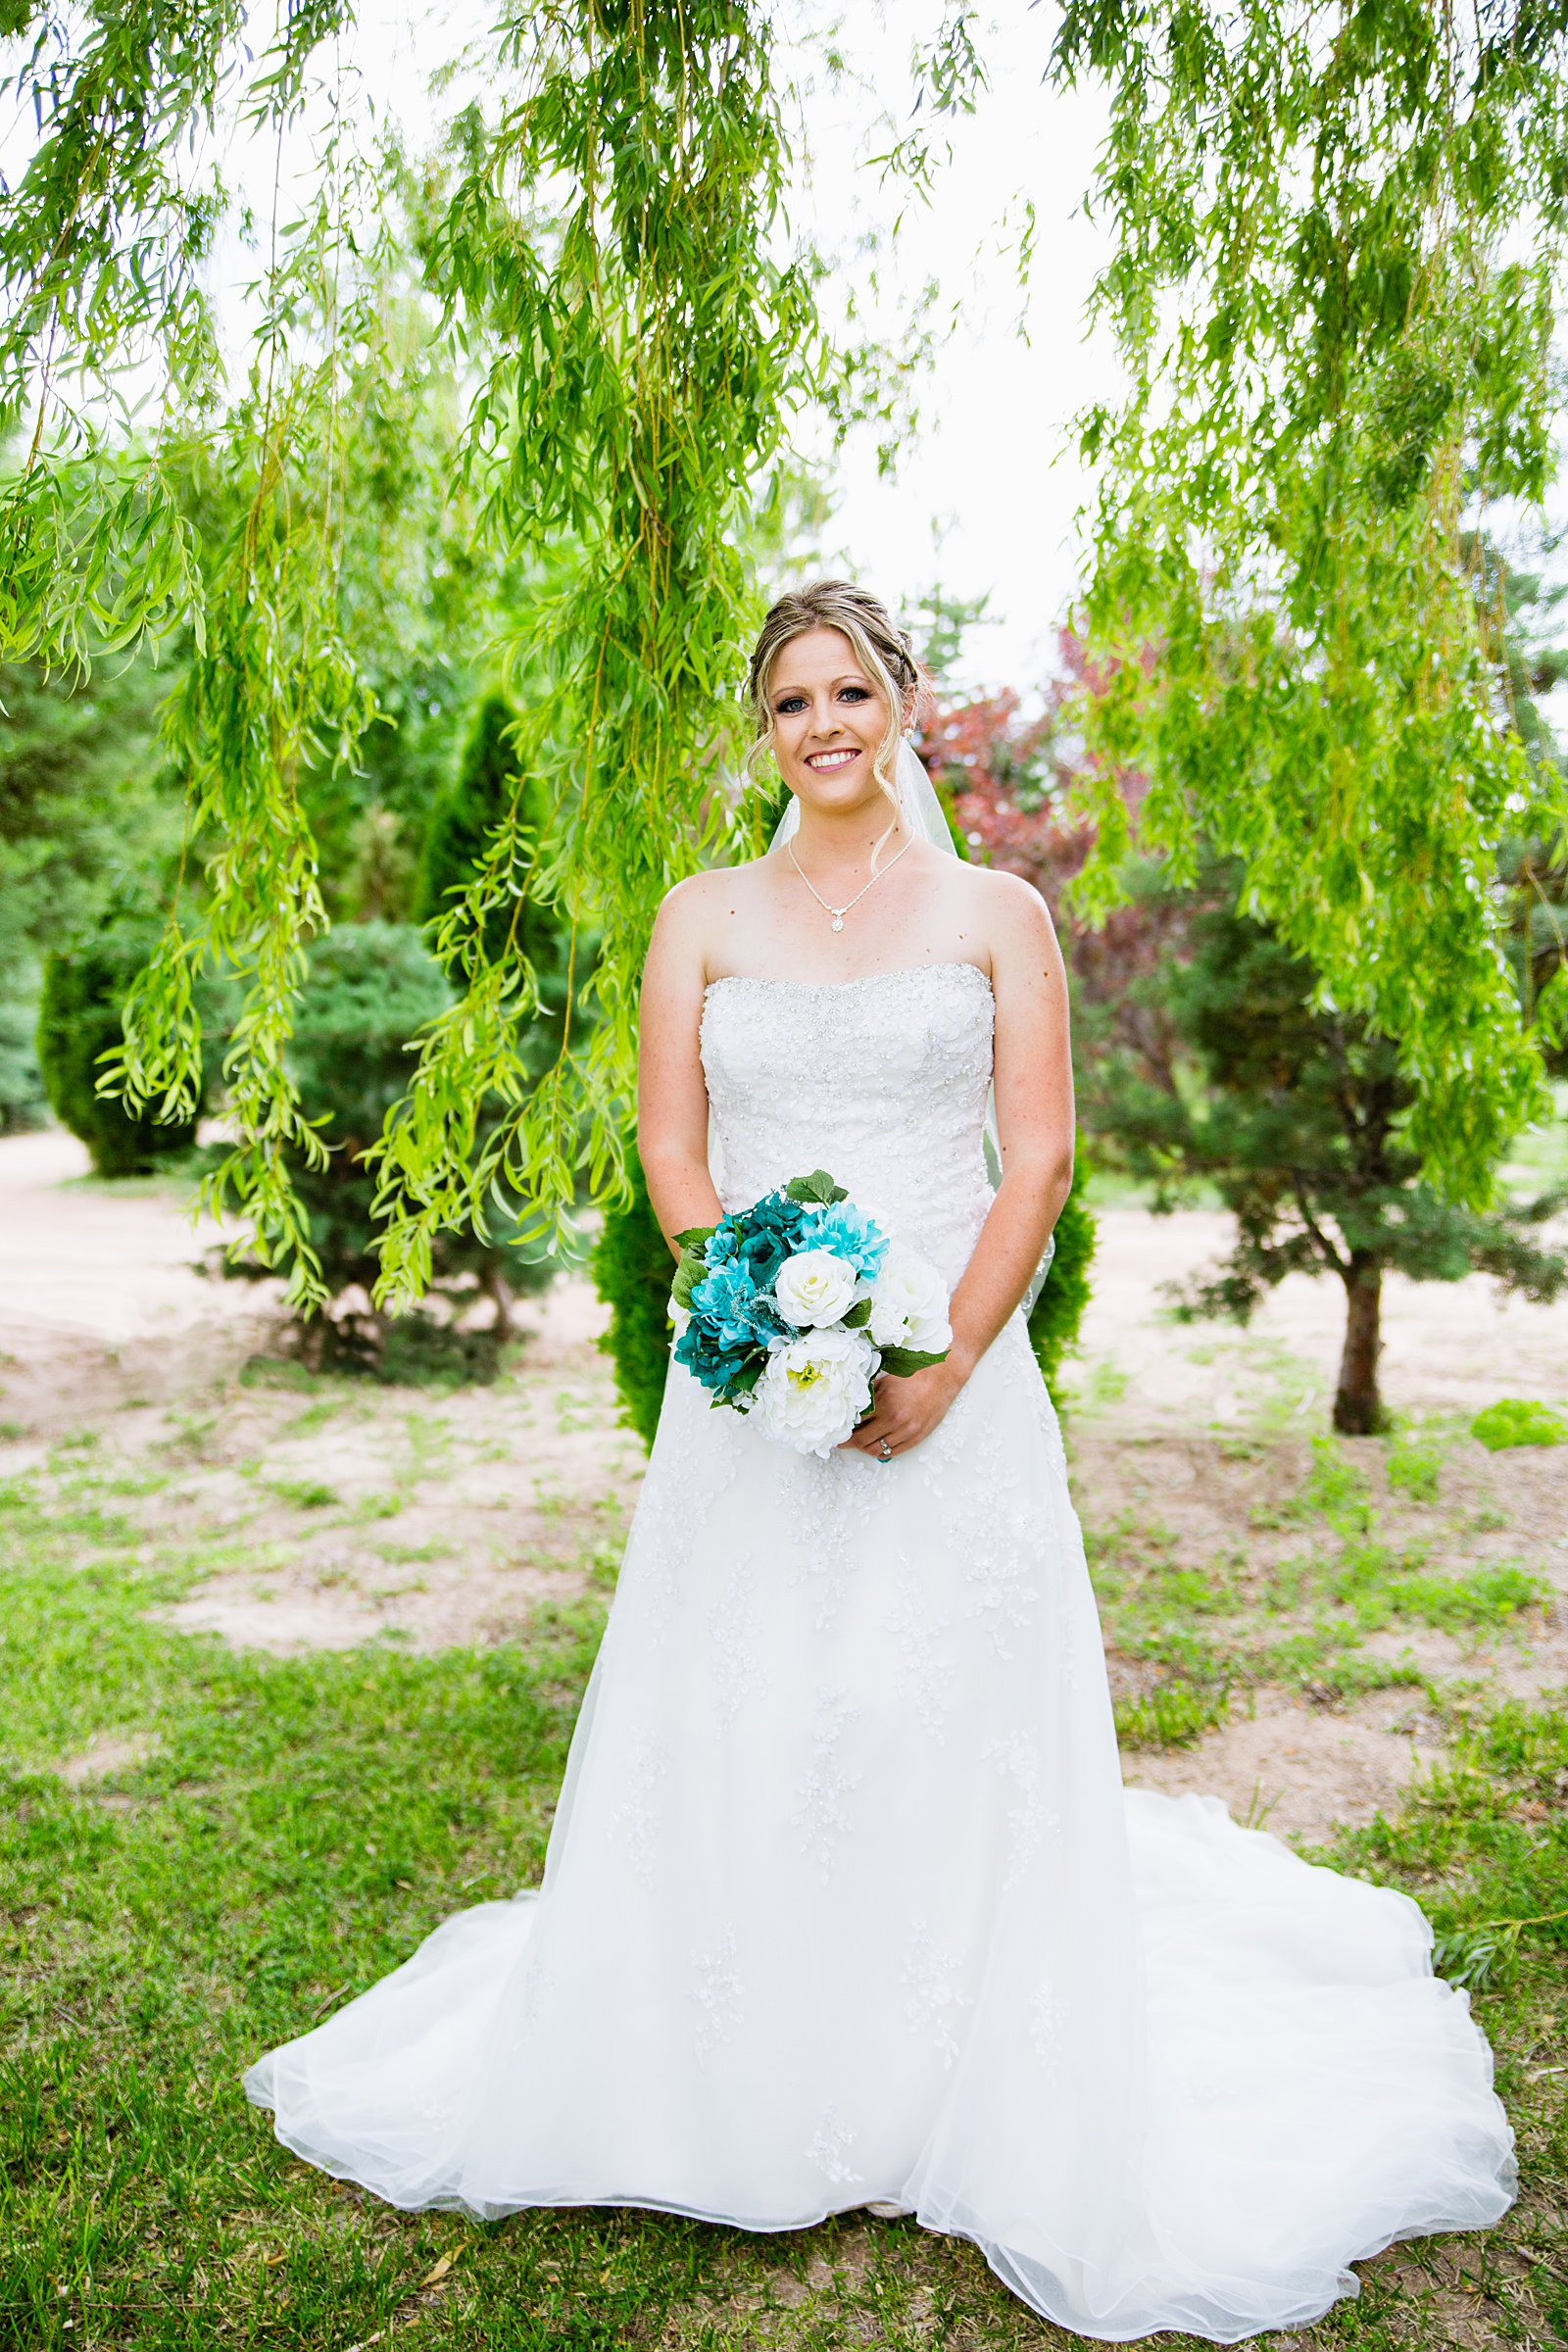 Bride's simple, classic wedding dress for her The Windmill House wedding by PMA Photography.